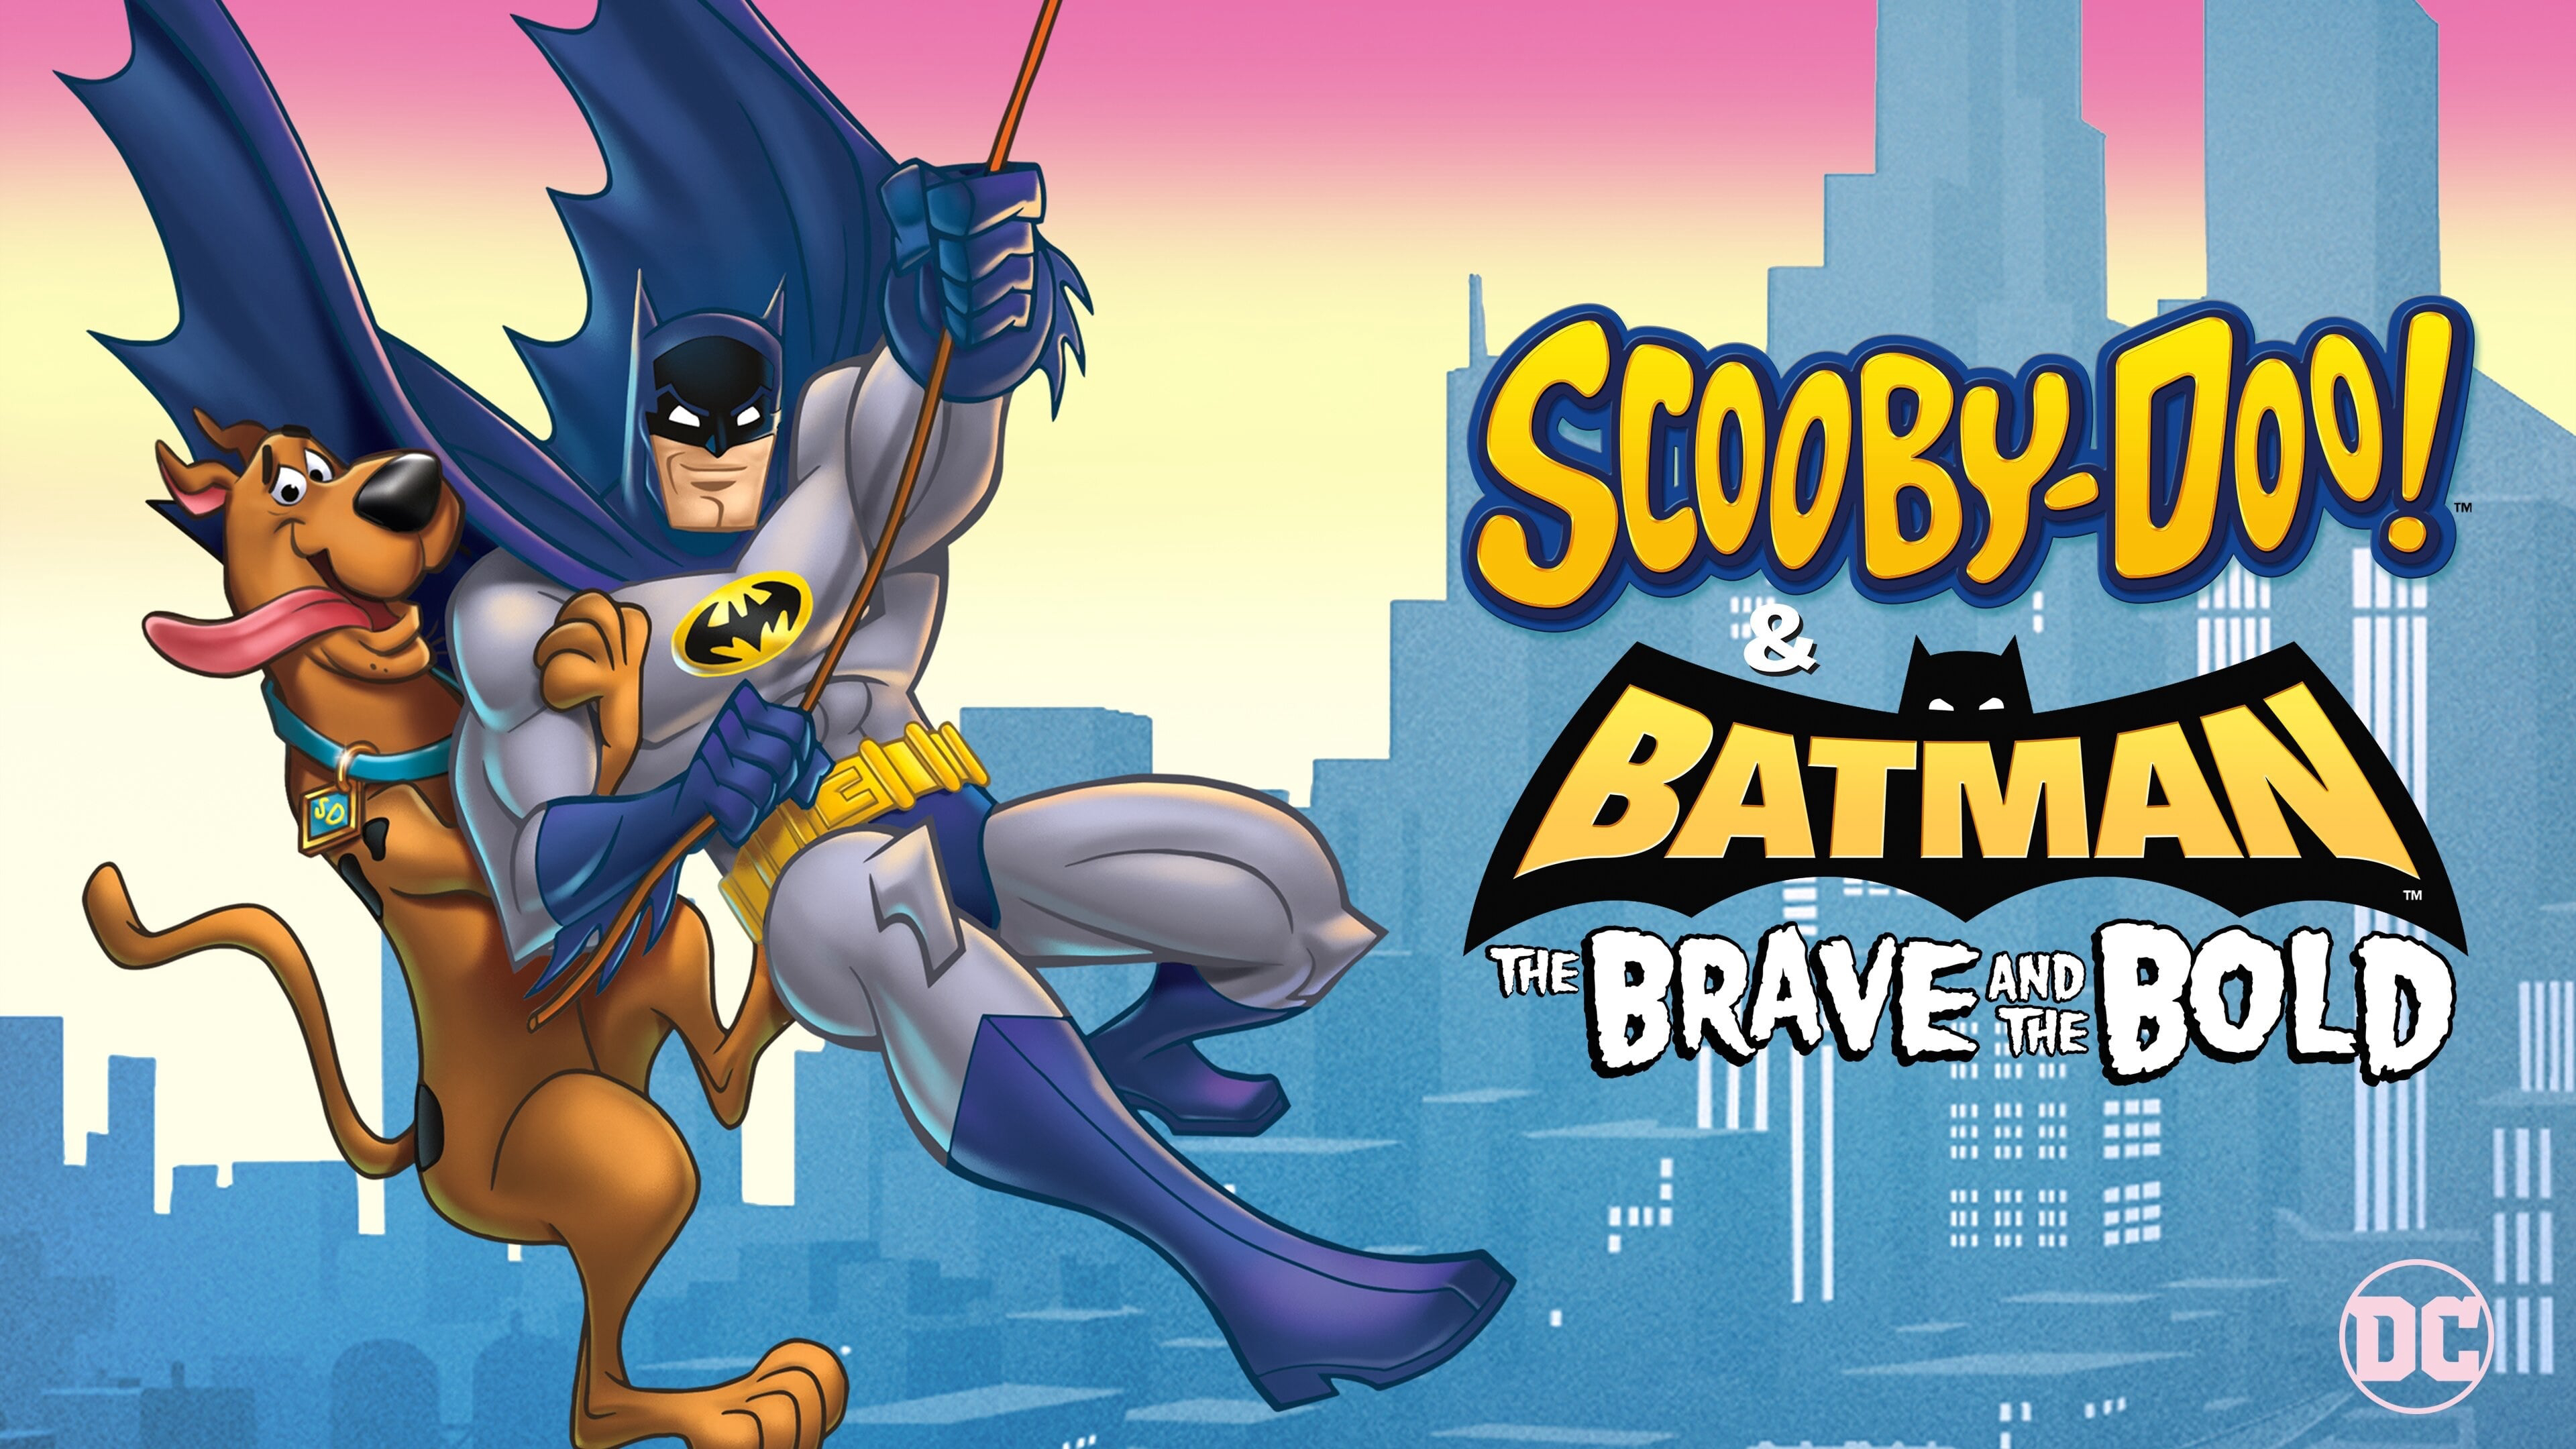 Scooby-Doo! & Batman: The Brave and the Bold / Scooby-Doo! & Batman: The Brave and the Bold (2018)